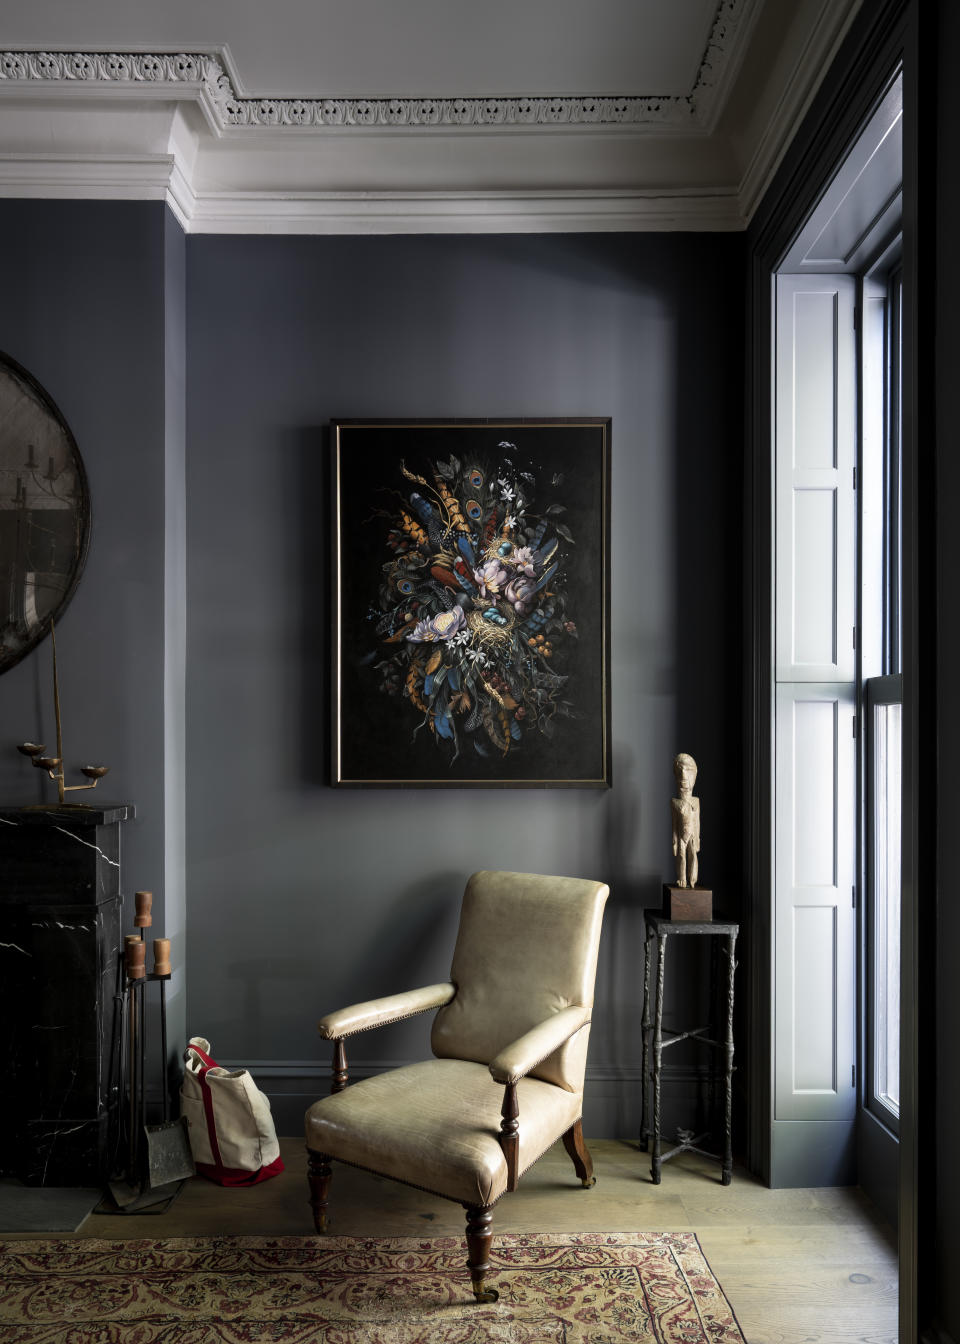 A sitting room in former Michael Kors CEO Josh Schulman’s home painted in Farrow & Ball’s Down Pipe.